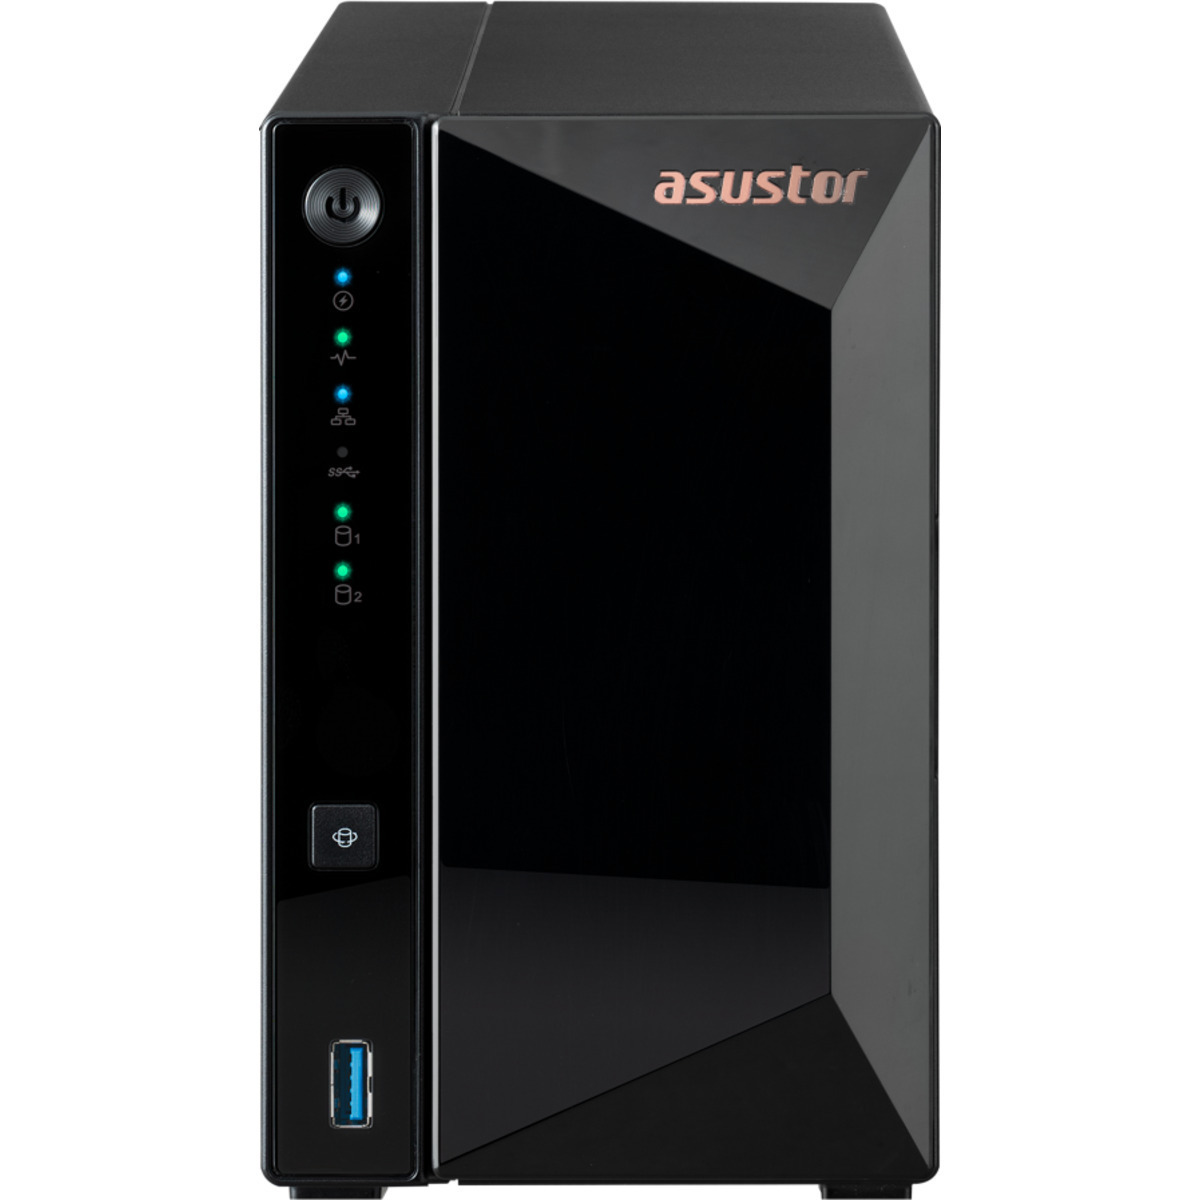 ASUSTOR DRIVESTOR 2 Pro Gen2 AS3302T v2 8tb 2-Bay Desktop Personal / Basic Home / Small Office NAS - Network Attached Storage Device 2x4tb Western Digital Red Pro WD4003FFBX 3.5 7200rpm SATA 6Gb/s HDD NAS Class Drives Installed - Burn-In Tested - ON SALE DRIVESTOR 2 Pro Gen2 AS3302T v2